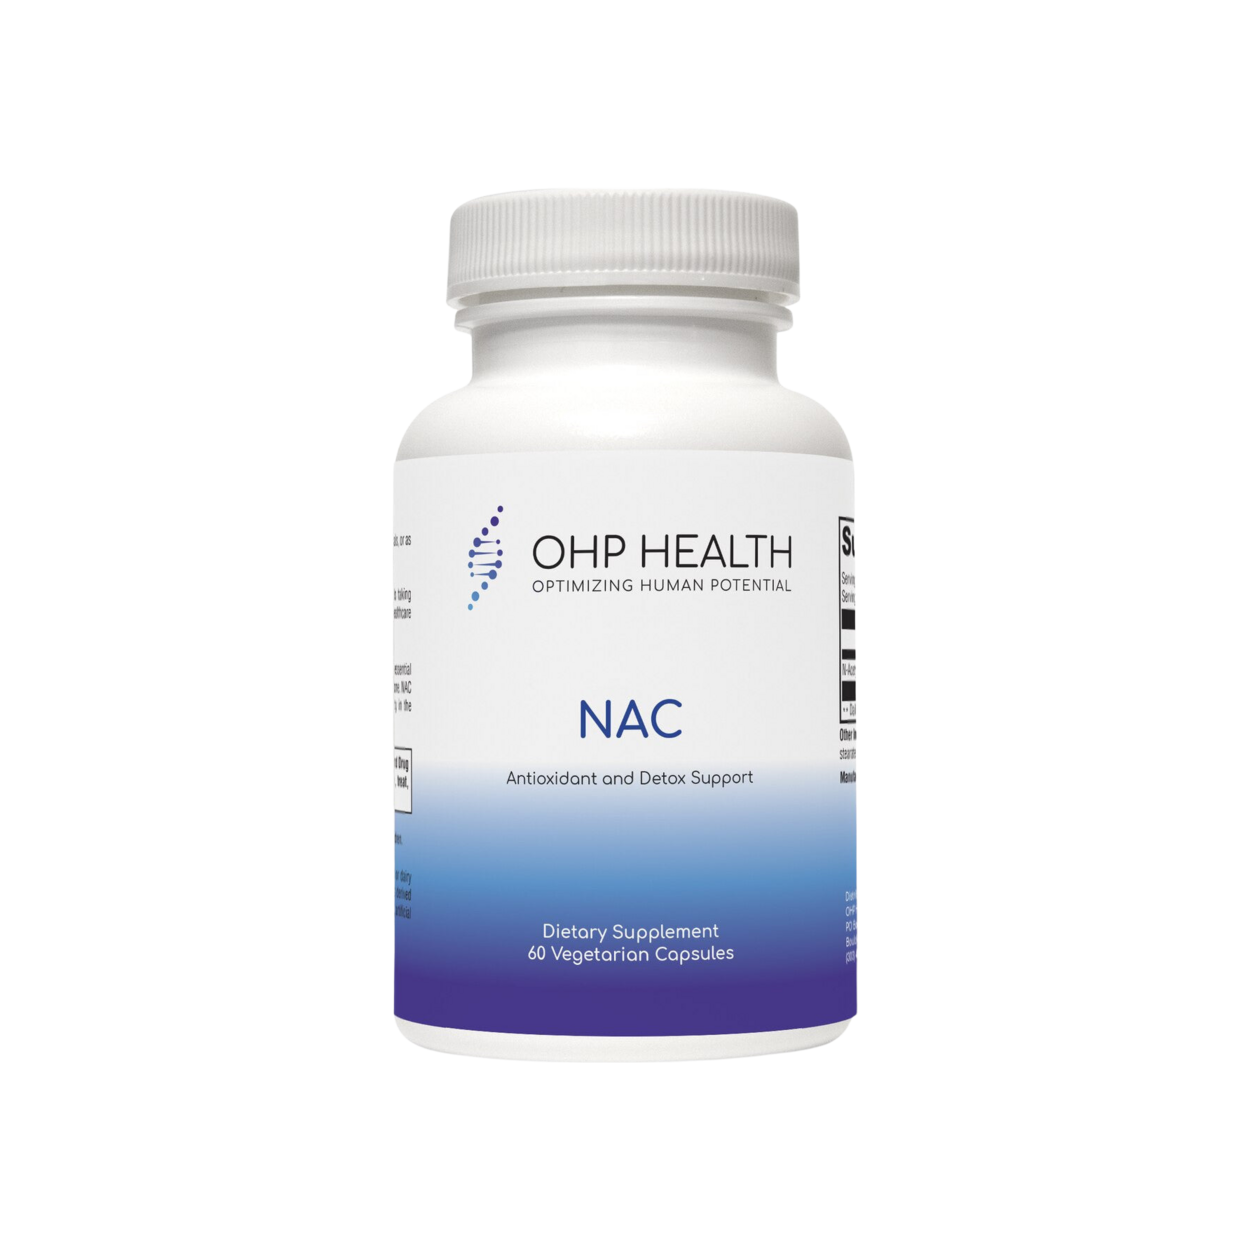 A bottle of OHP Health's NAC | 60 count.